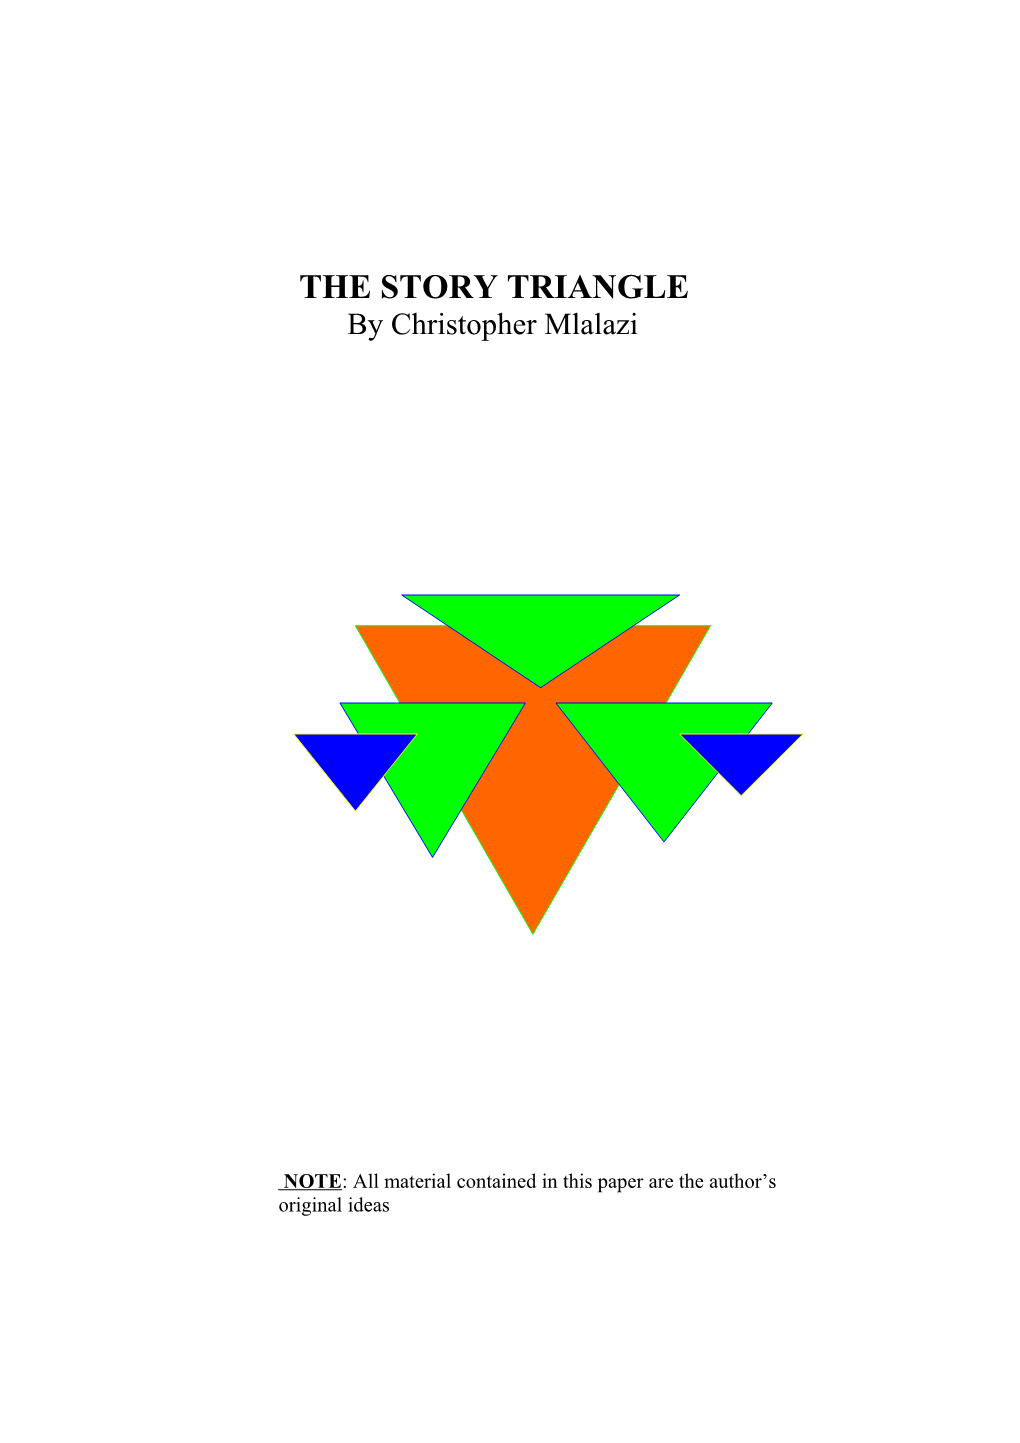 The Story Triangle